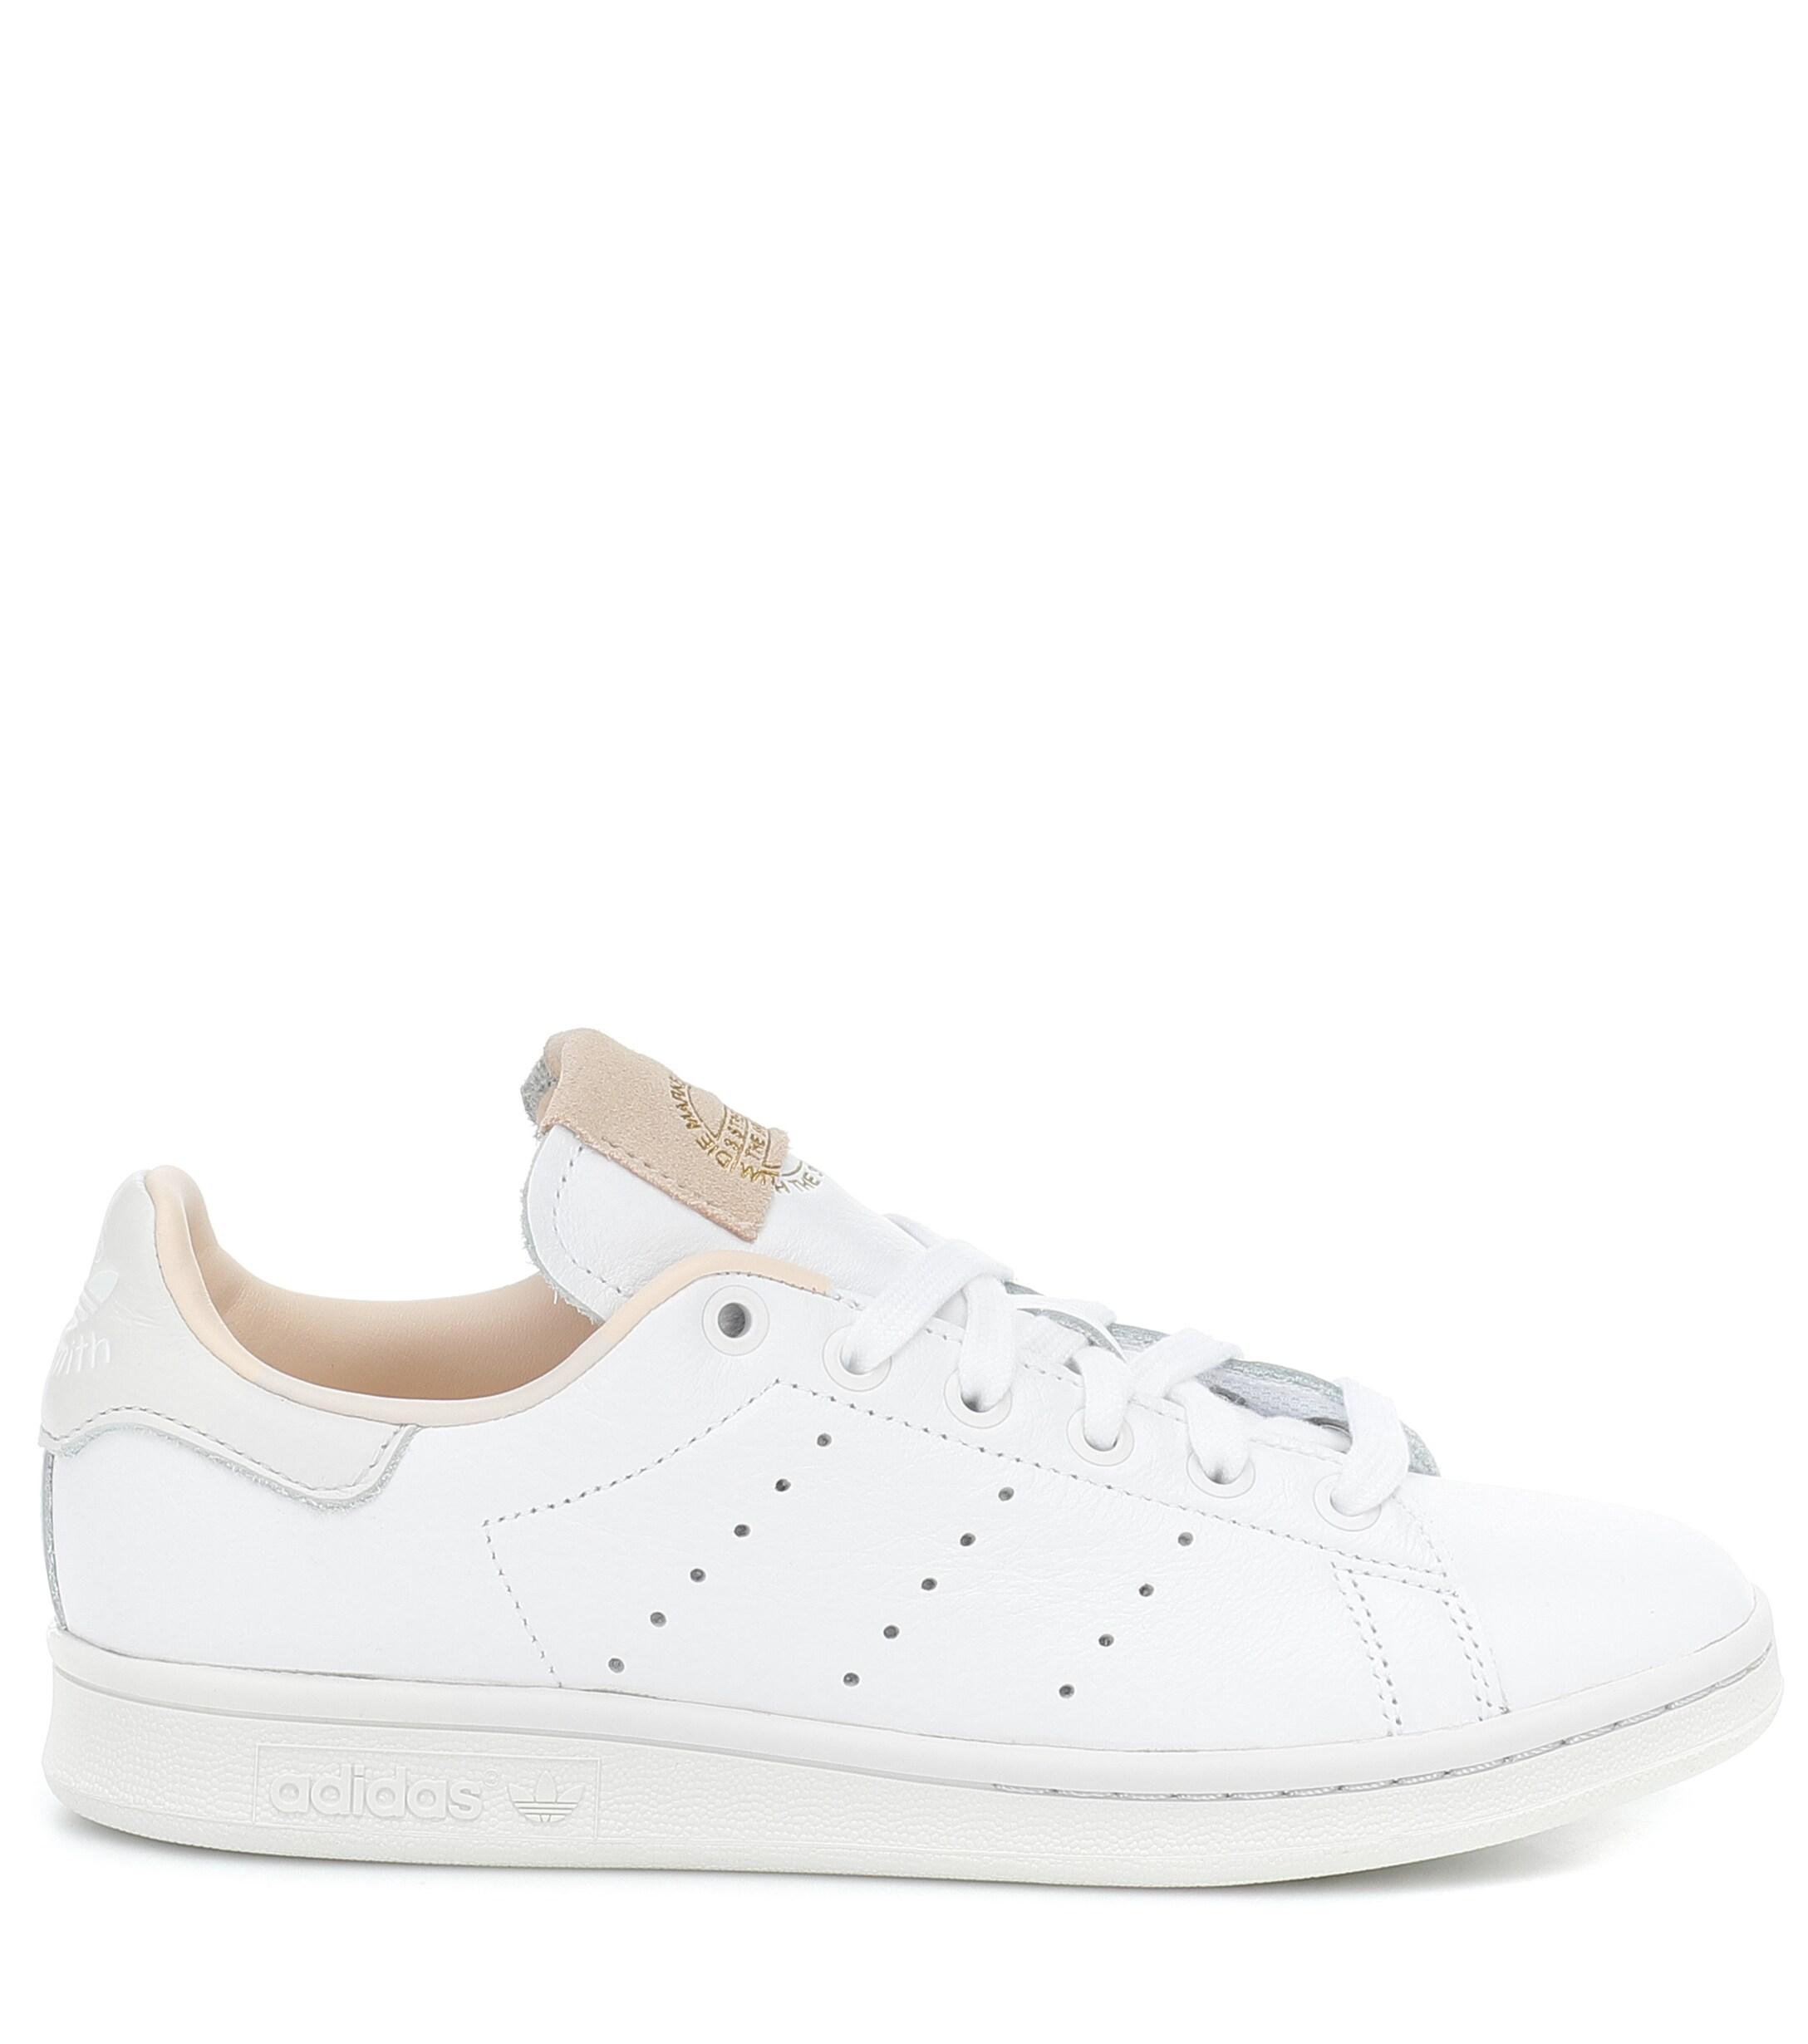 adidas Originals Leather 'stan Smith' Sneakers in White for Men - Save 79%  - Lyst